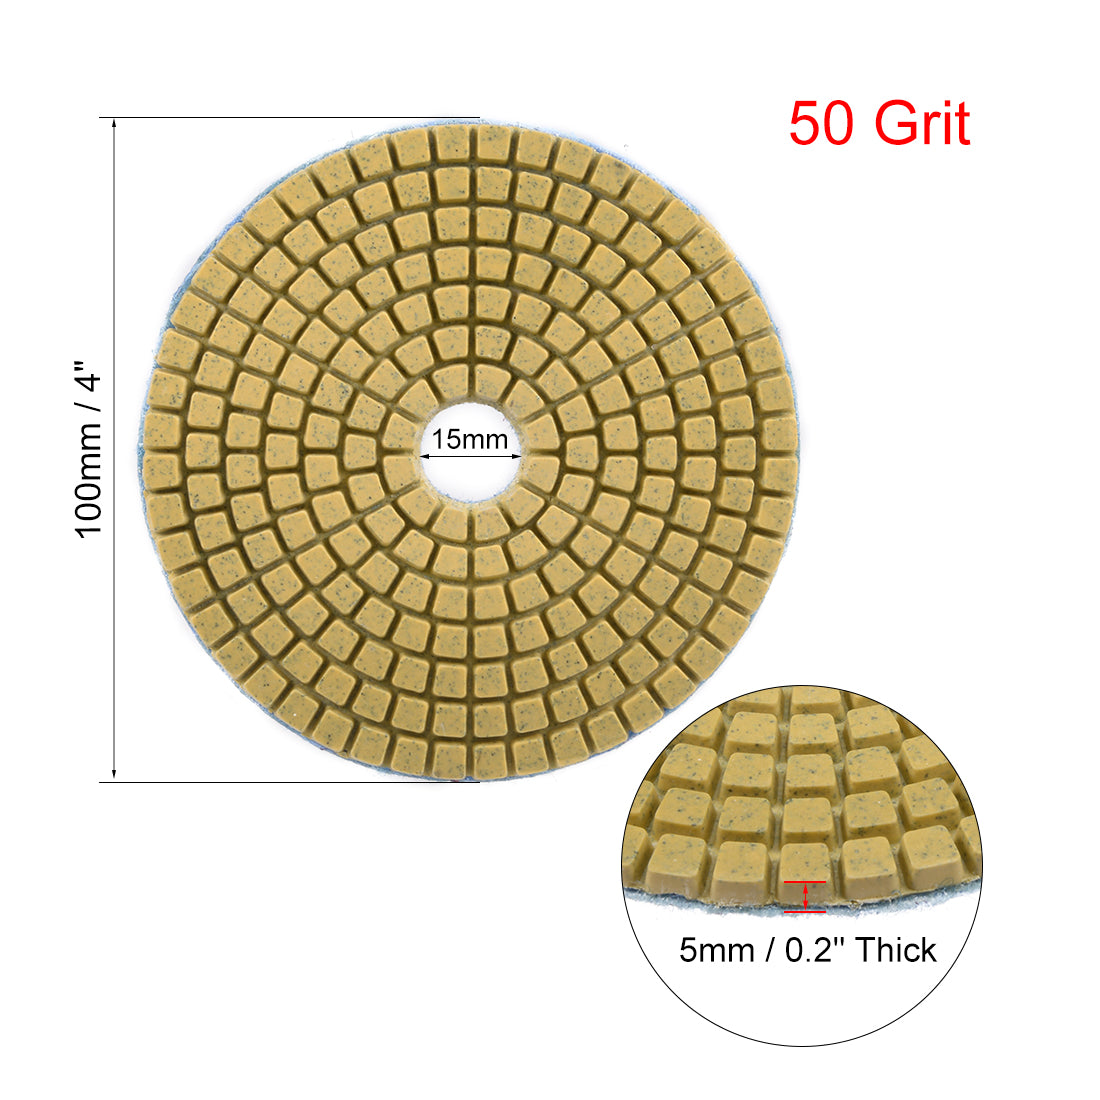 uxcell Uxcell Diamond Polishing Sanding Grinding Pads Discs 4 Inch Grit 50 3 Pcs for Granite Concrete Stone Marble